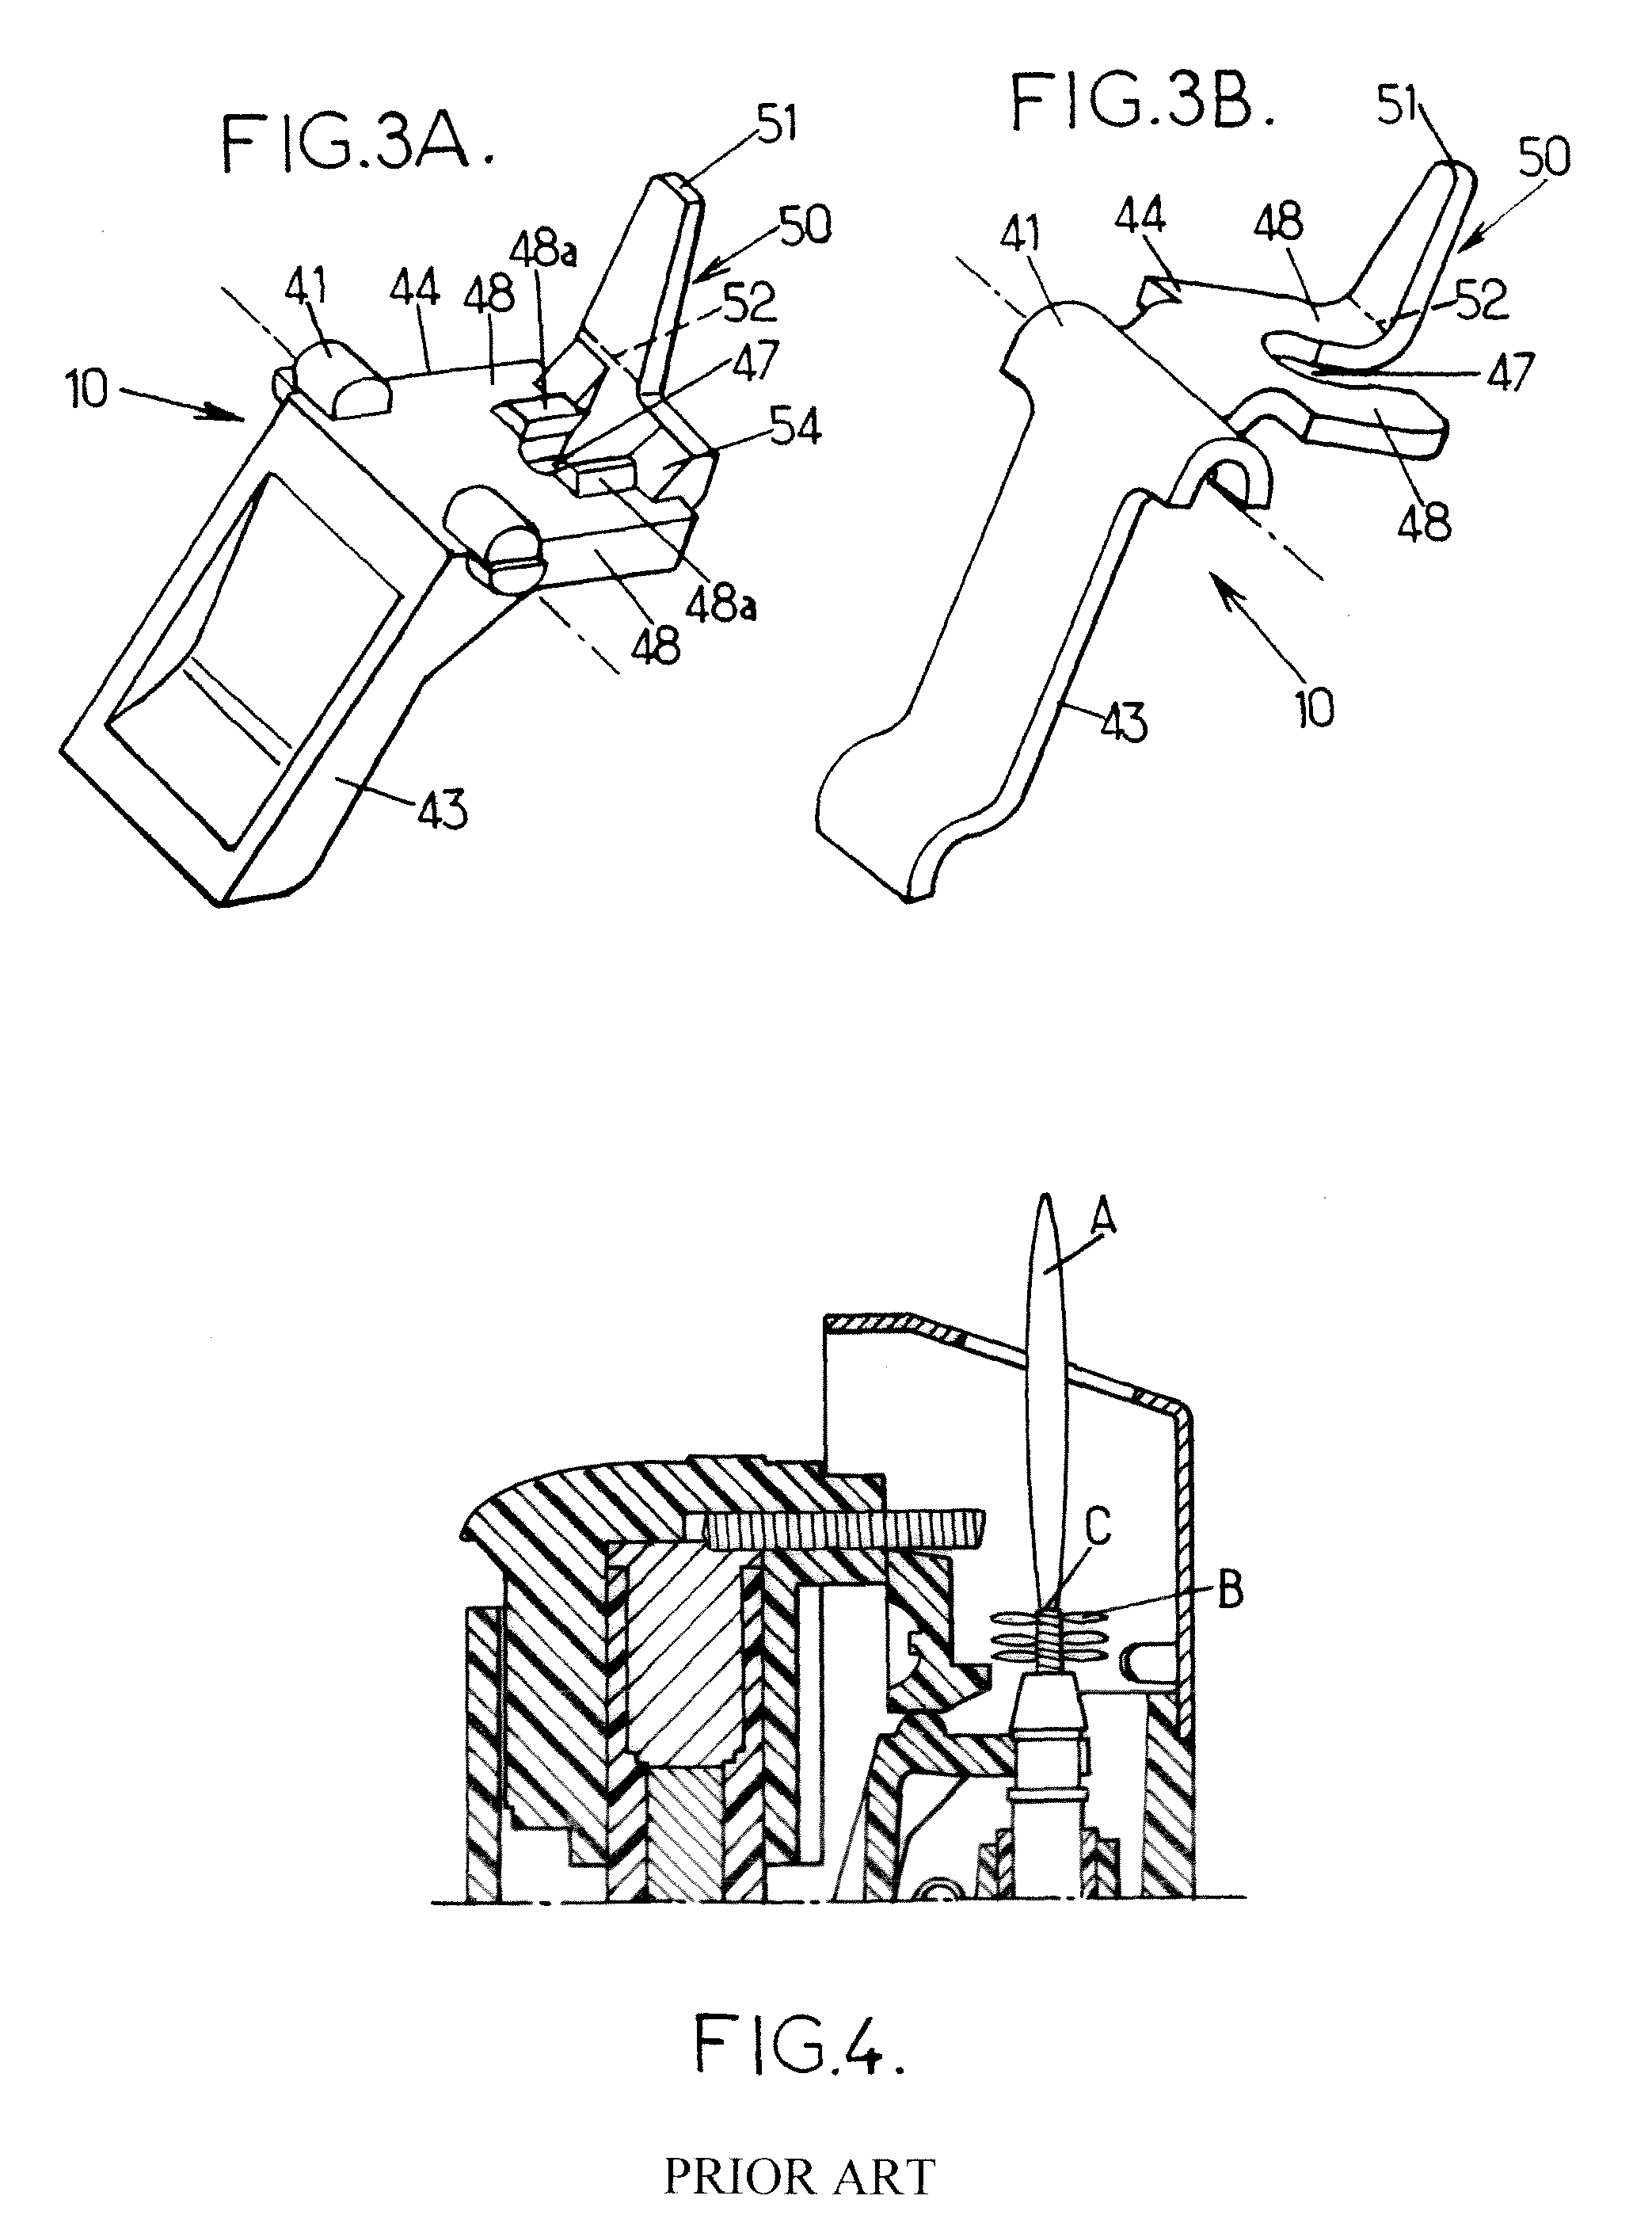 Lighter with piezoelectric ignition